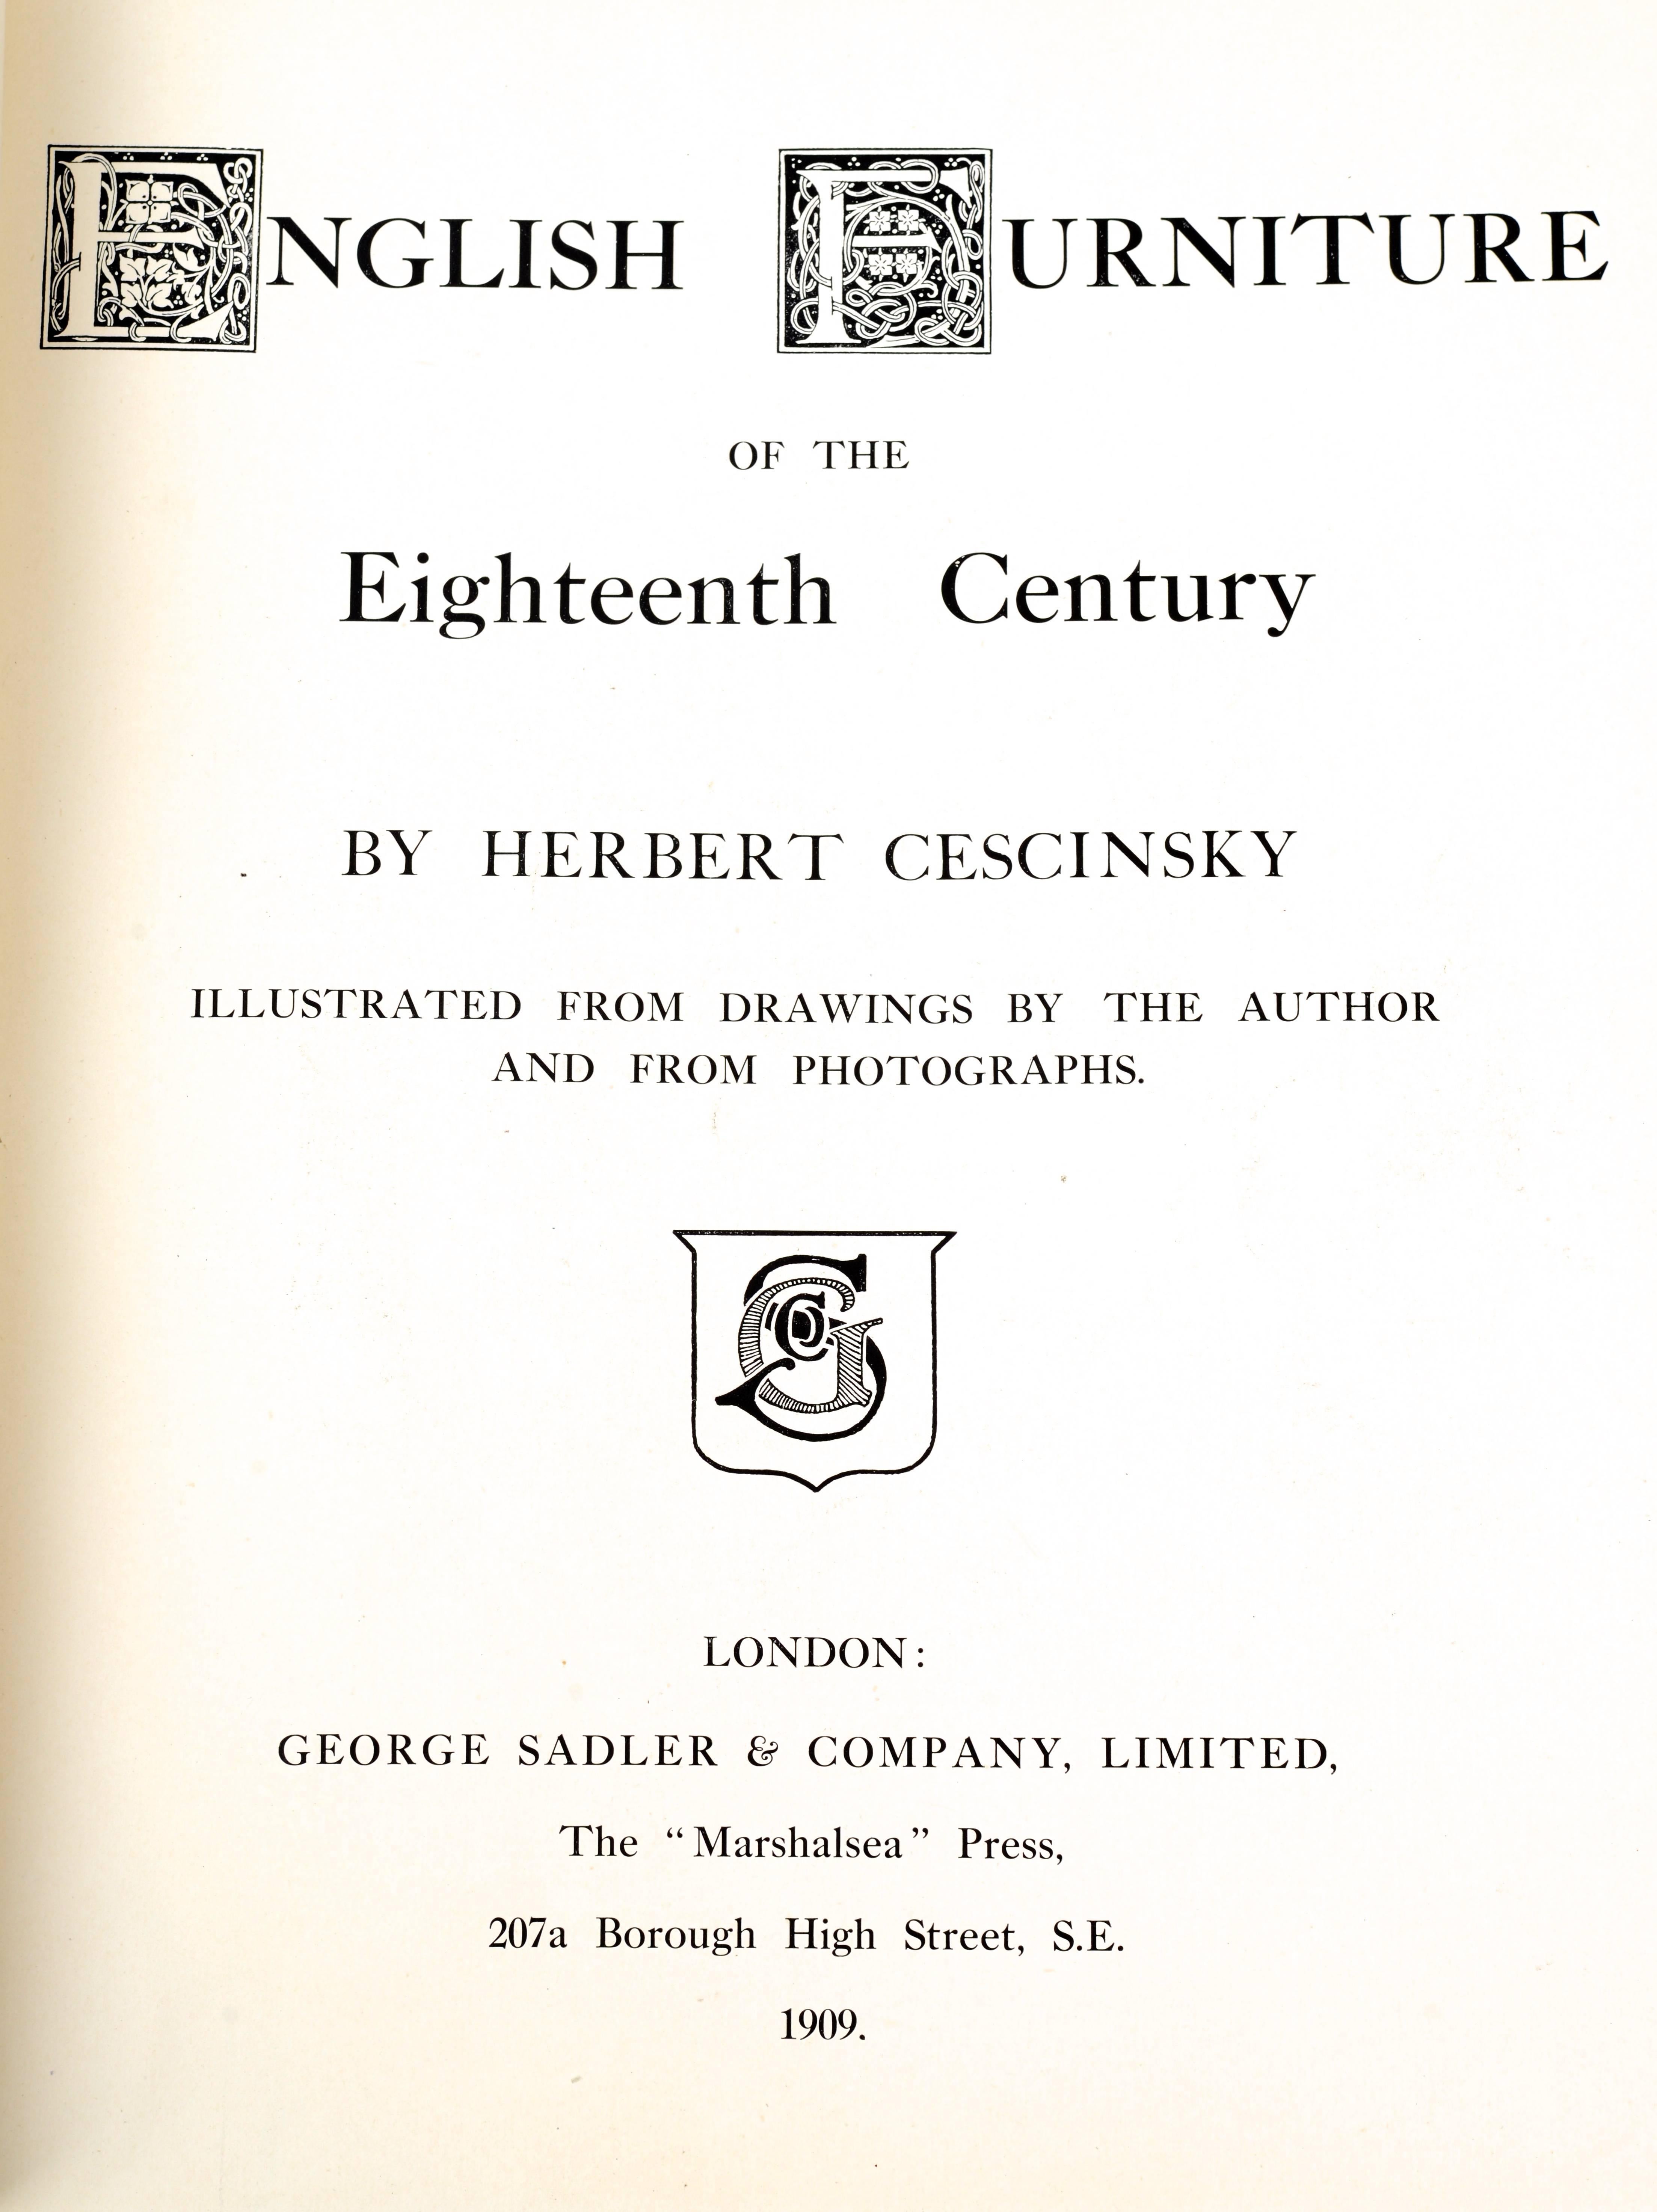 English Furniture of the 18th-Century, Vol. I. II. and III. by Herbert Cescinsky 4